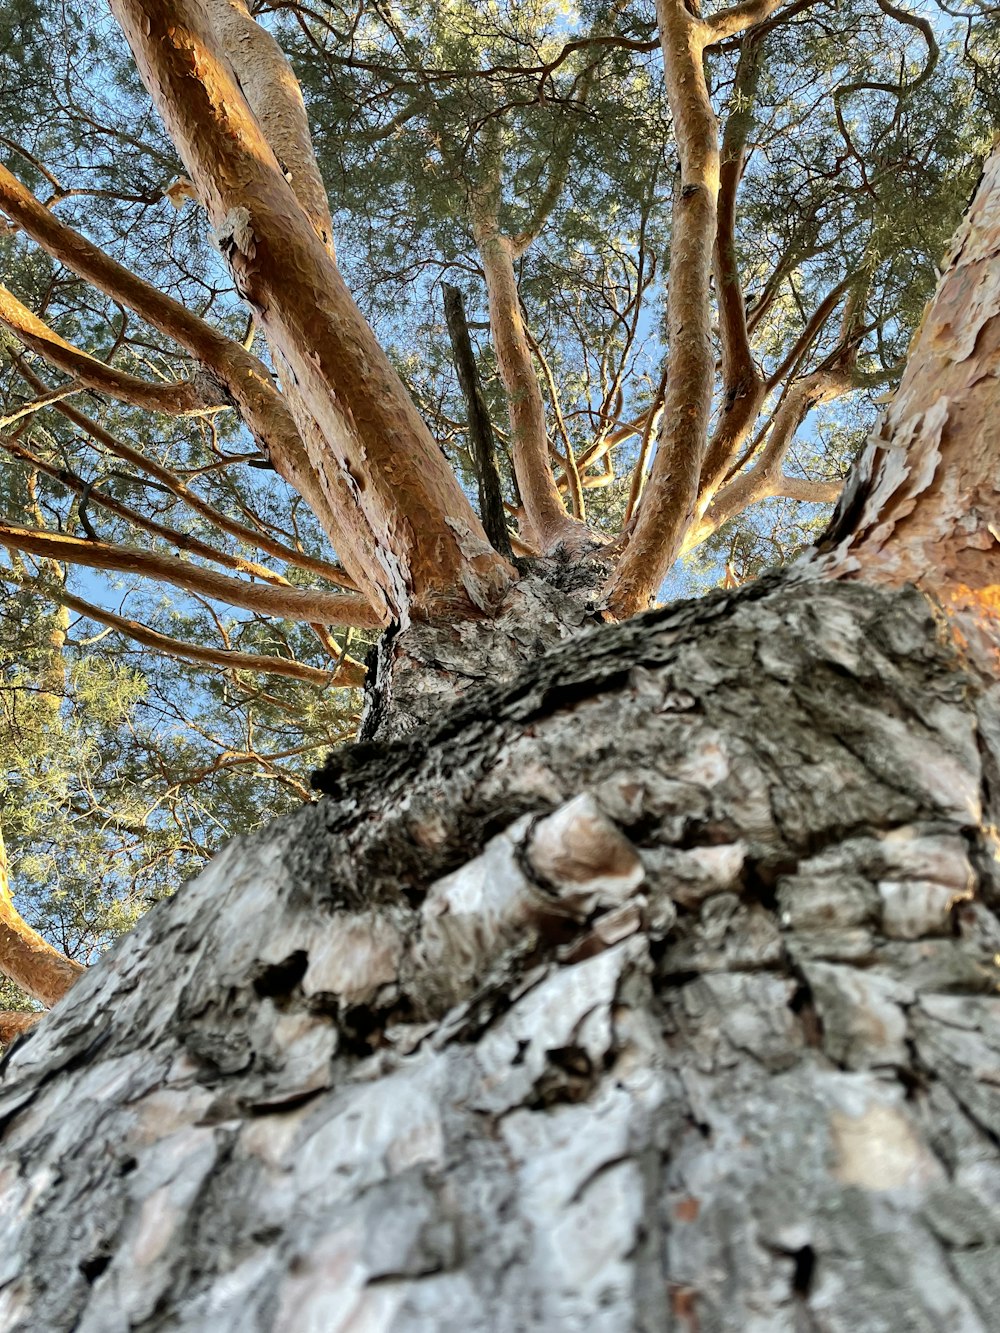 looking up at the bark of a tall tree